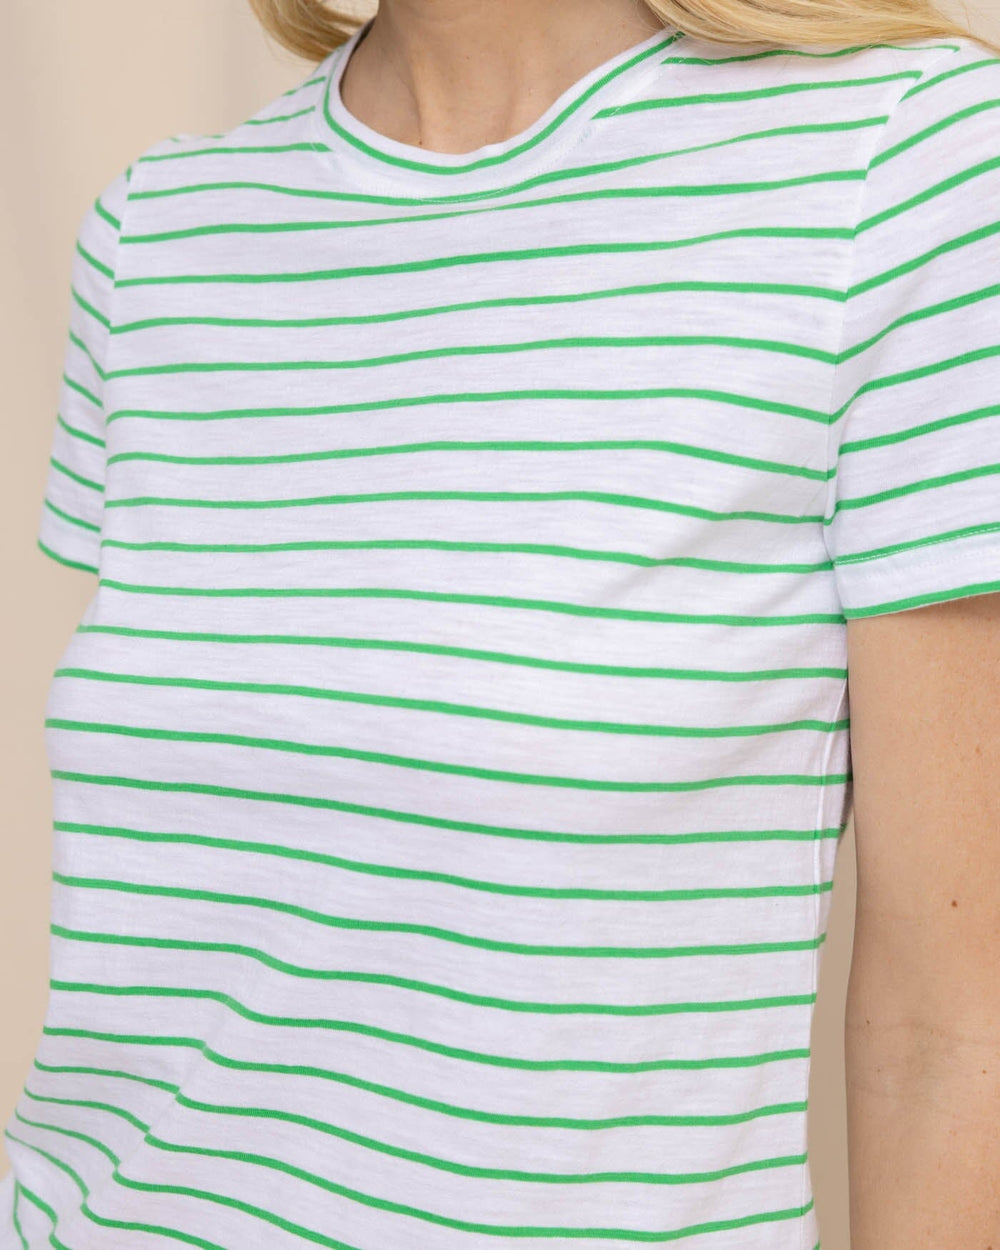 The detail view of the Southern Tide Sun Farer Stripe Crew Neck T-Shirt by Southern Tide - Lawn Green